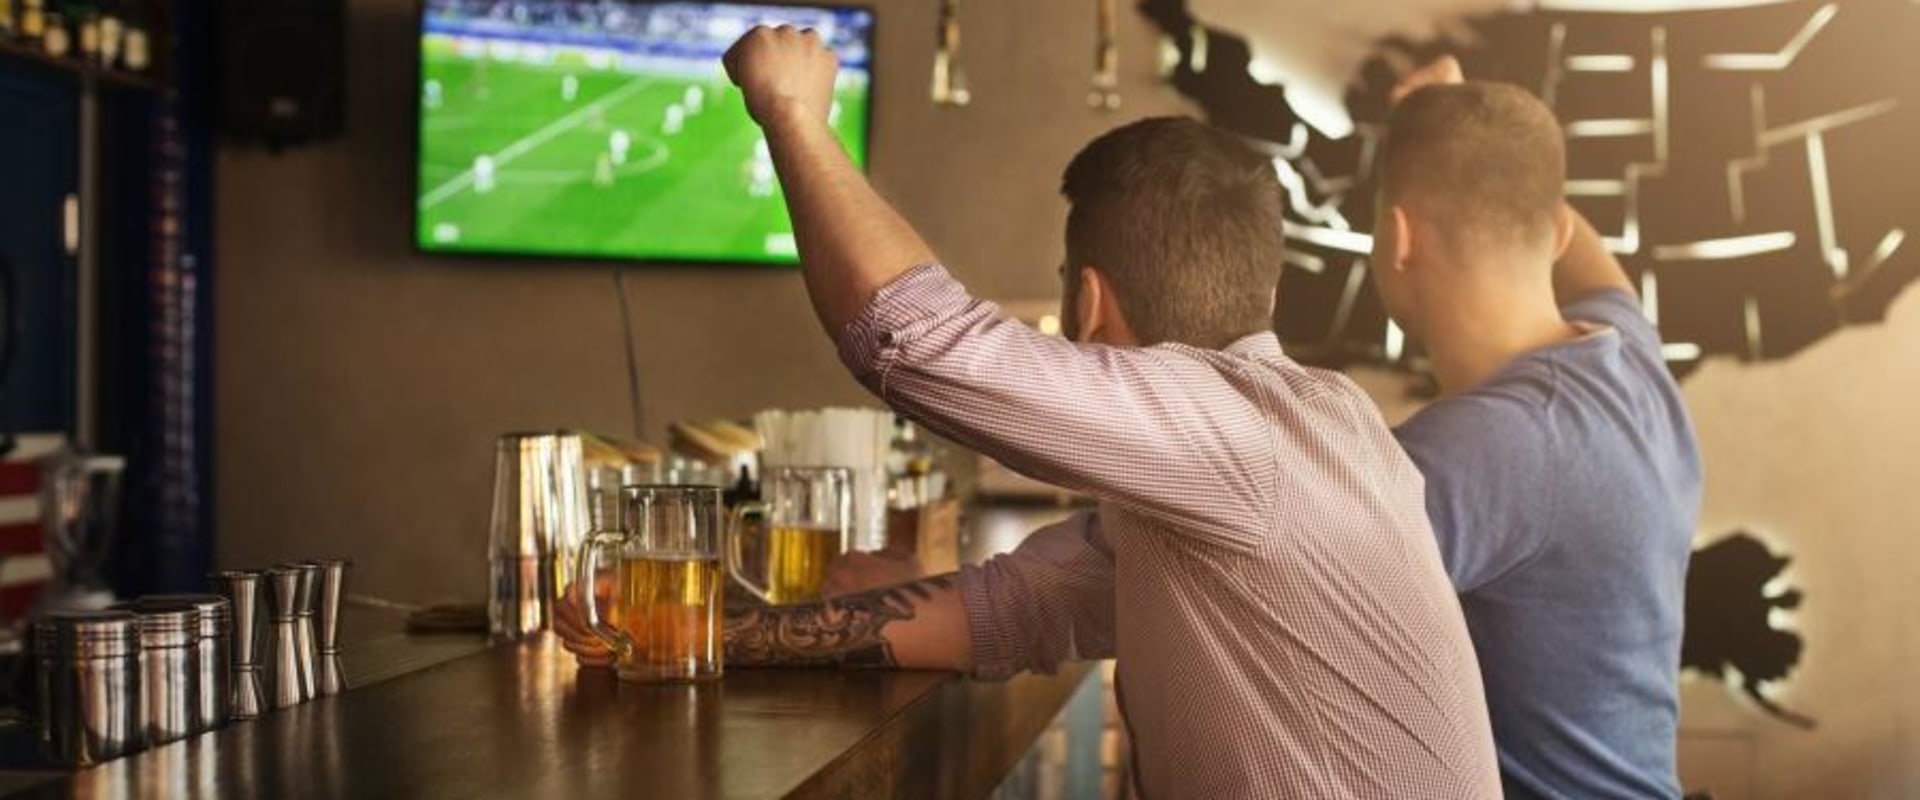 The Best Sports Bars in Scottsdale, AZ: Where to Watch the Big Game